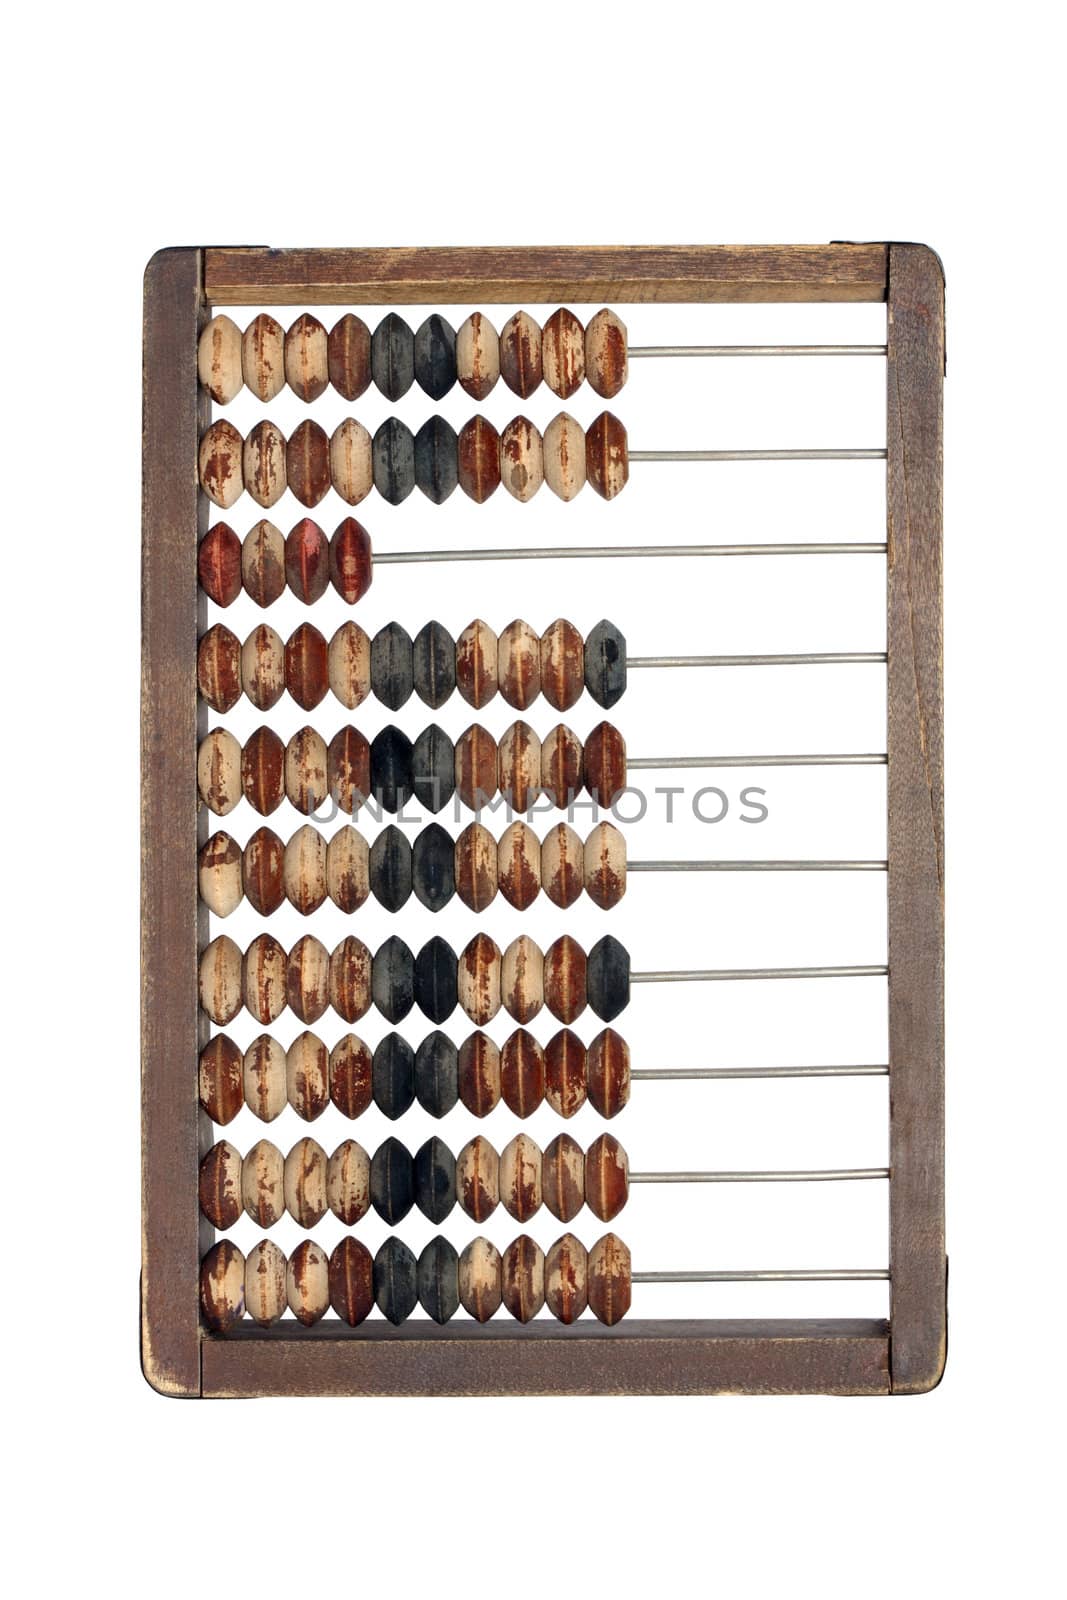 Old wooden abacus isolated on white background with clipping path